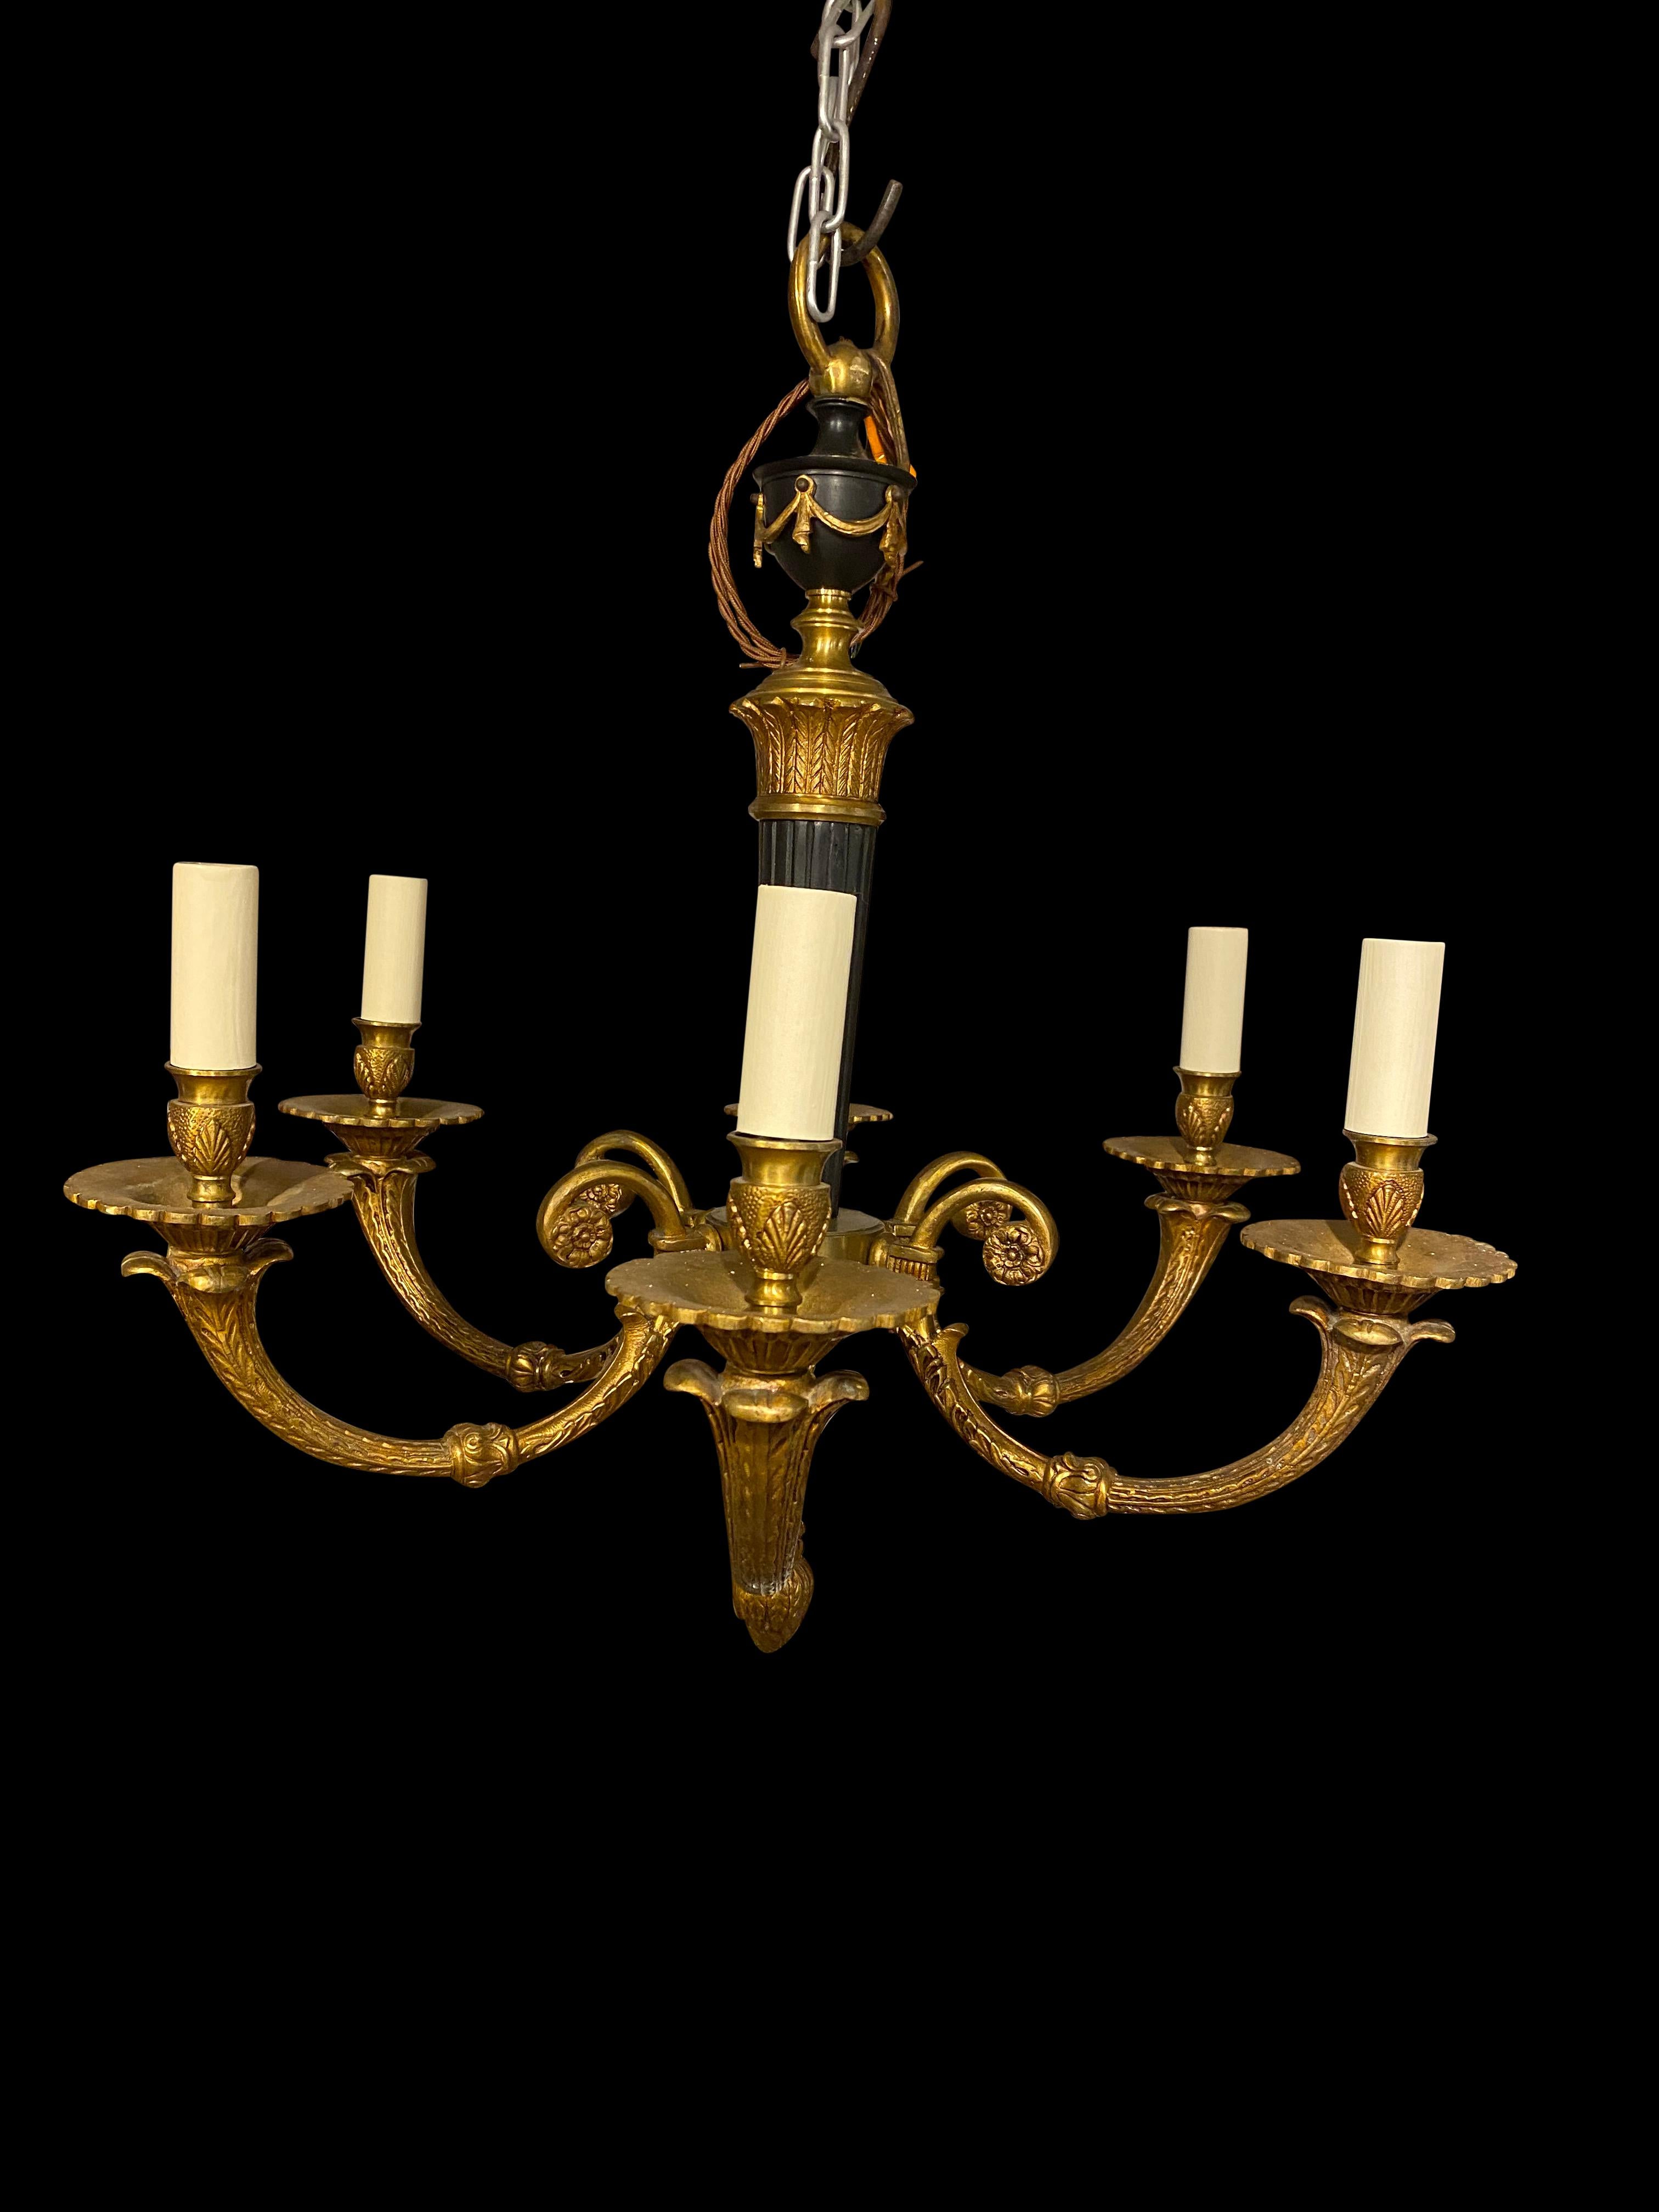 19th Century French Empire Chandelier In Excellent Condition For Sale In London, GB